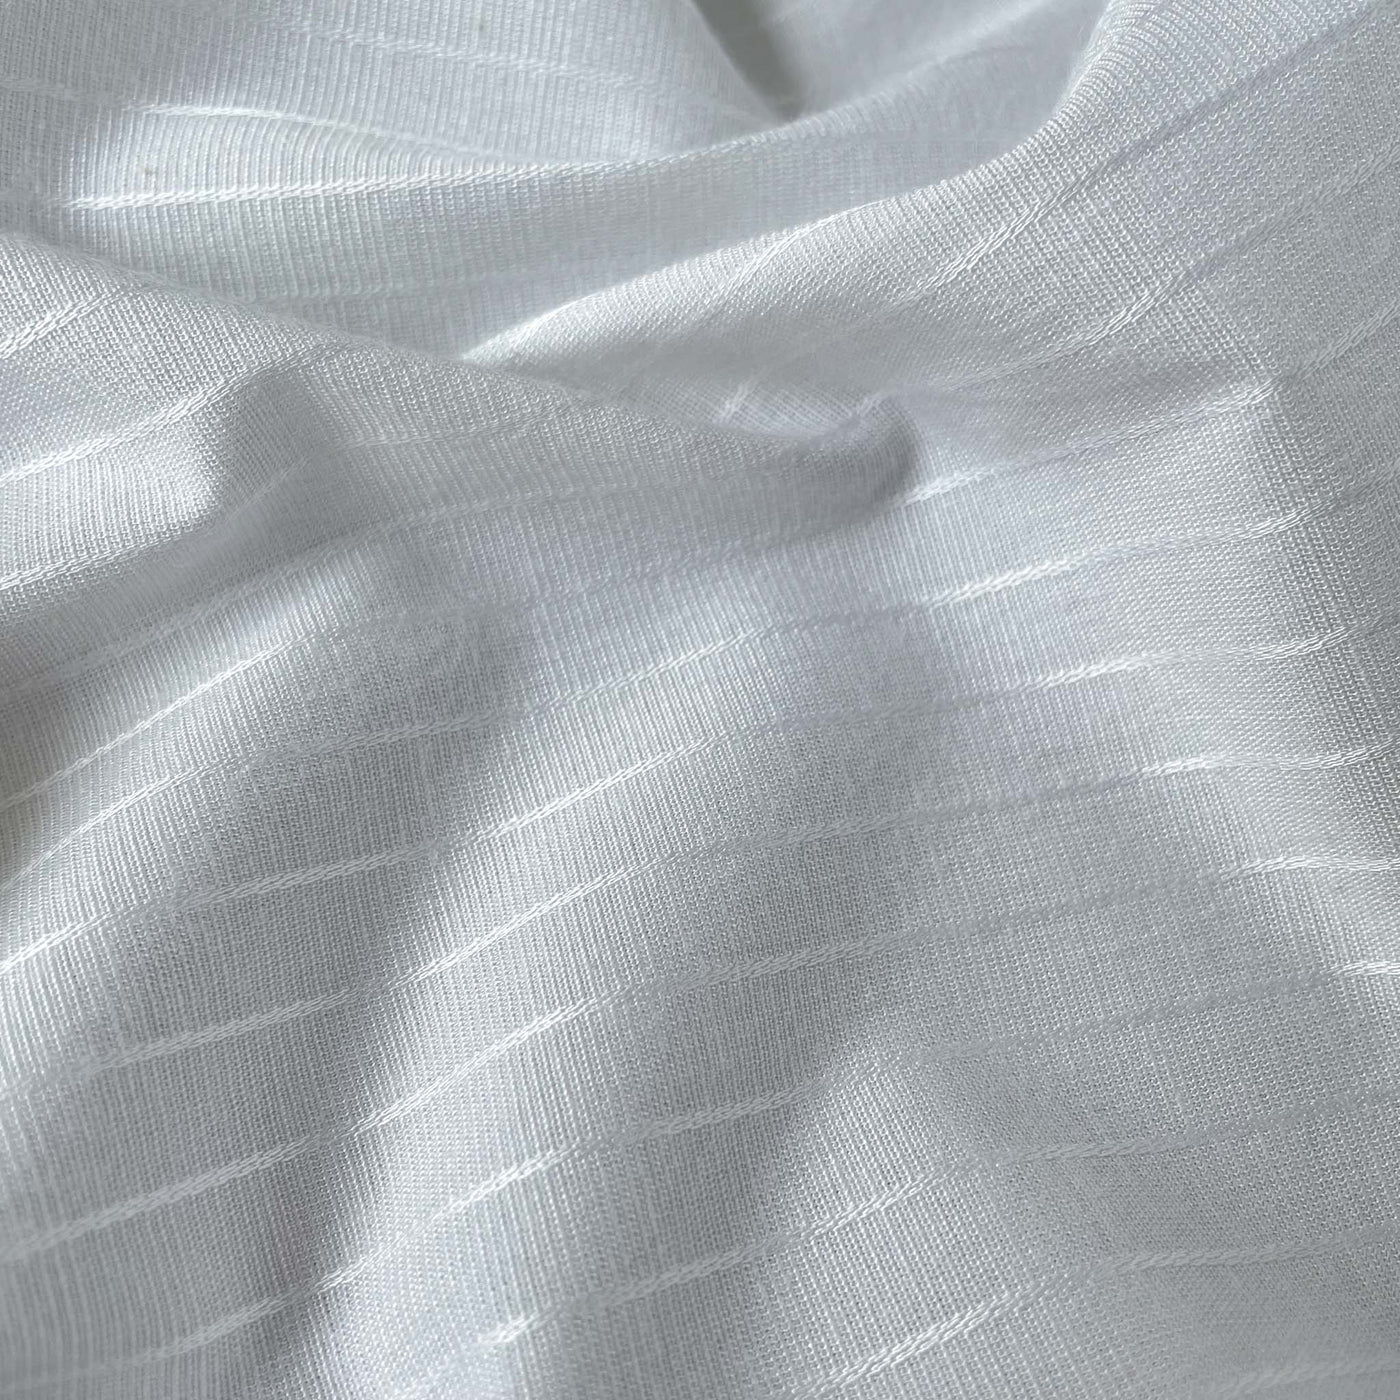 Fabric Pandit Fabric White Dyeable Pure Cotton Lycra Stripes Fabric (Width 48 Inches, 174 Gms)